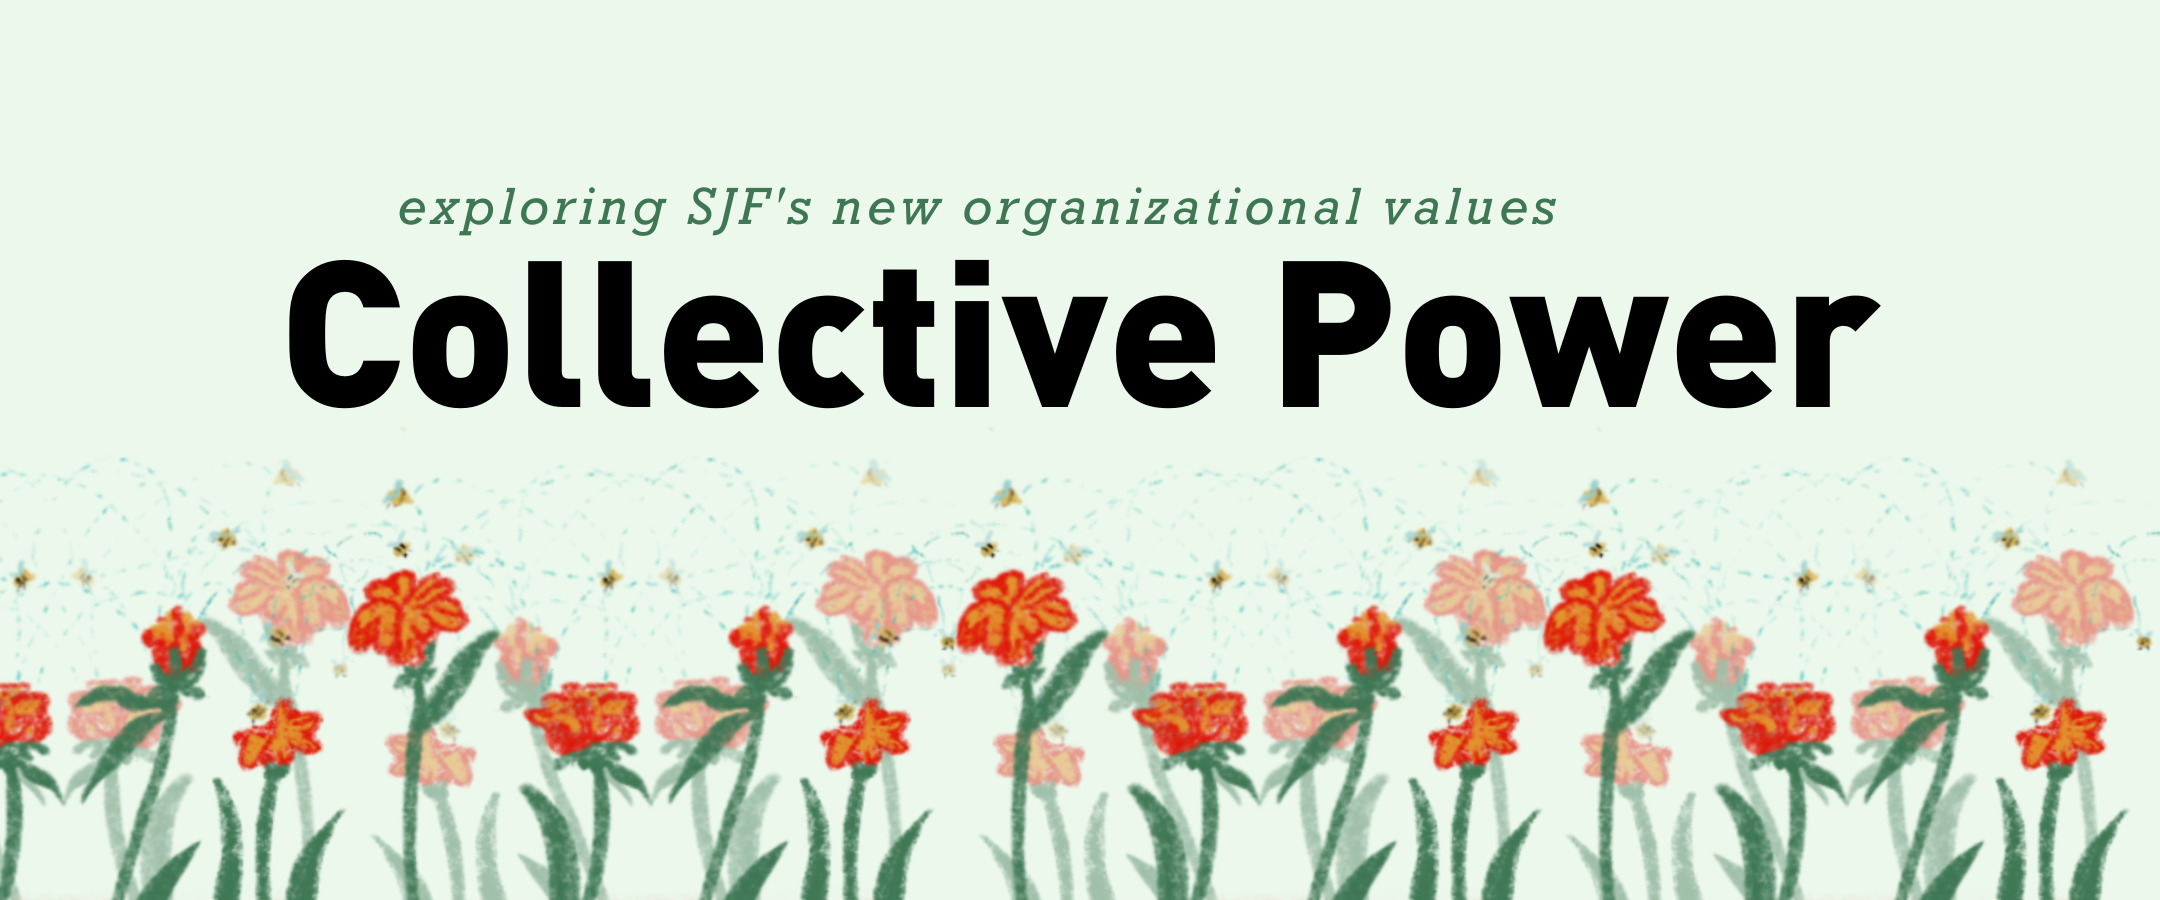 Rectangular banner image with light green background and illustration of red flowers across the bottom. Black text reads Exploring SJFs new organizational values. Collective Power